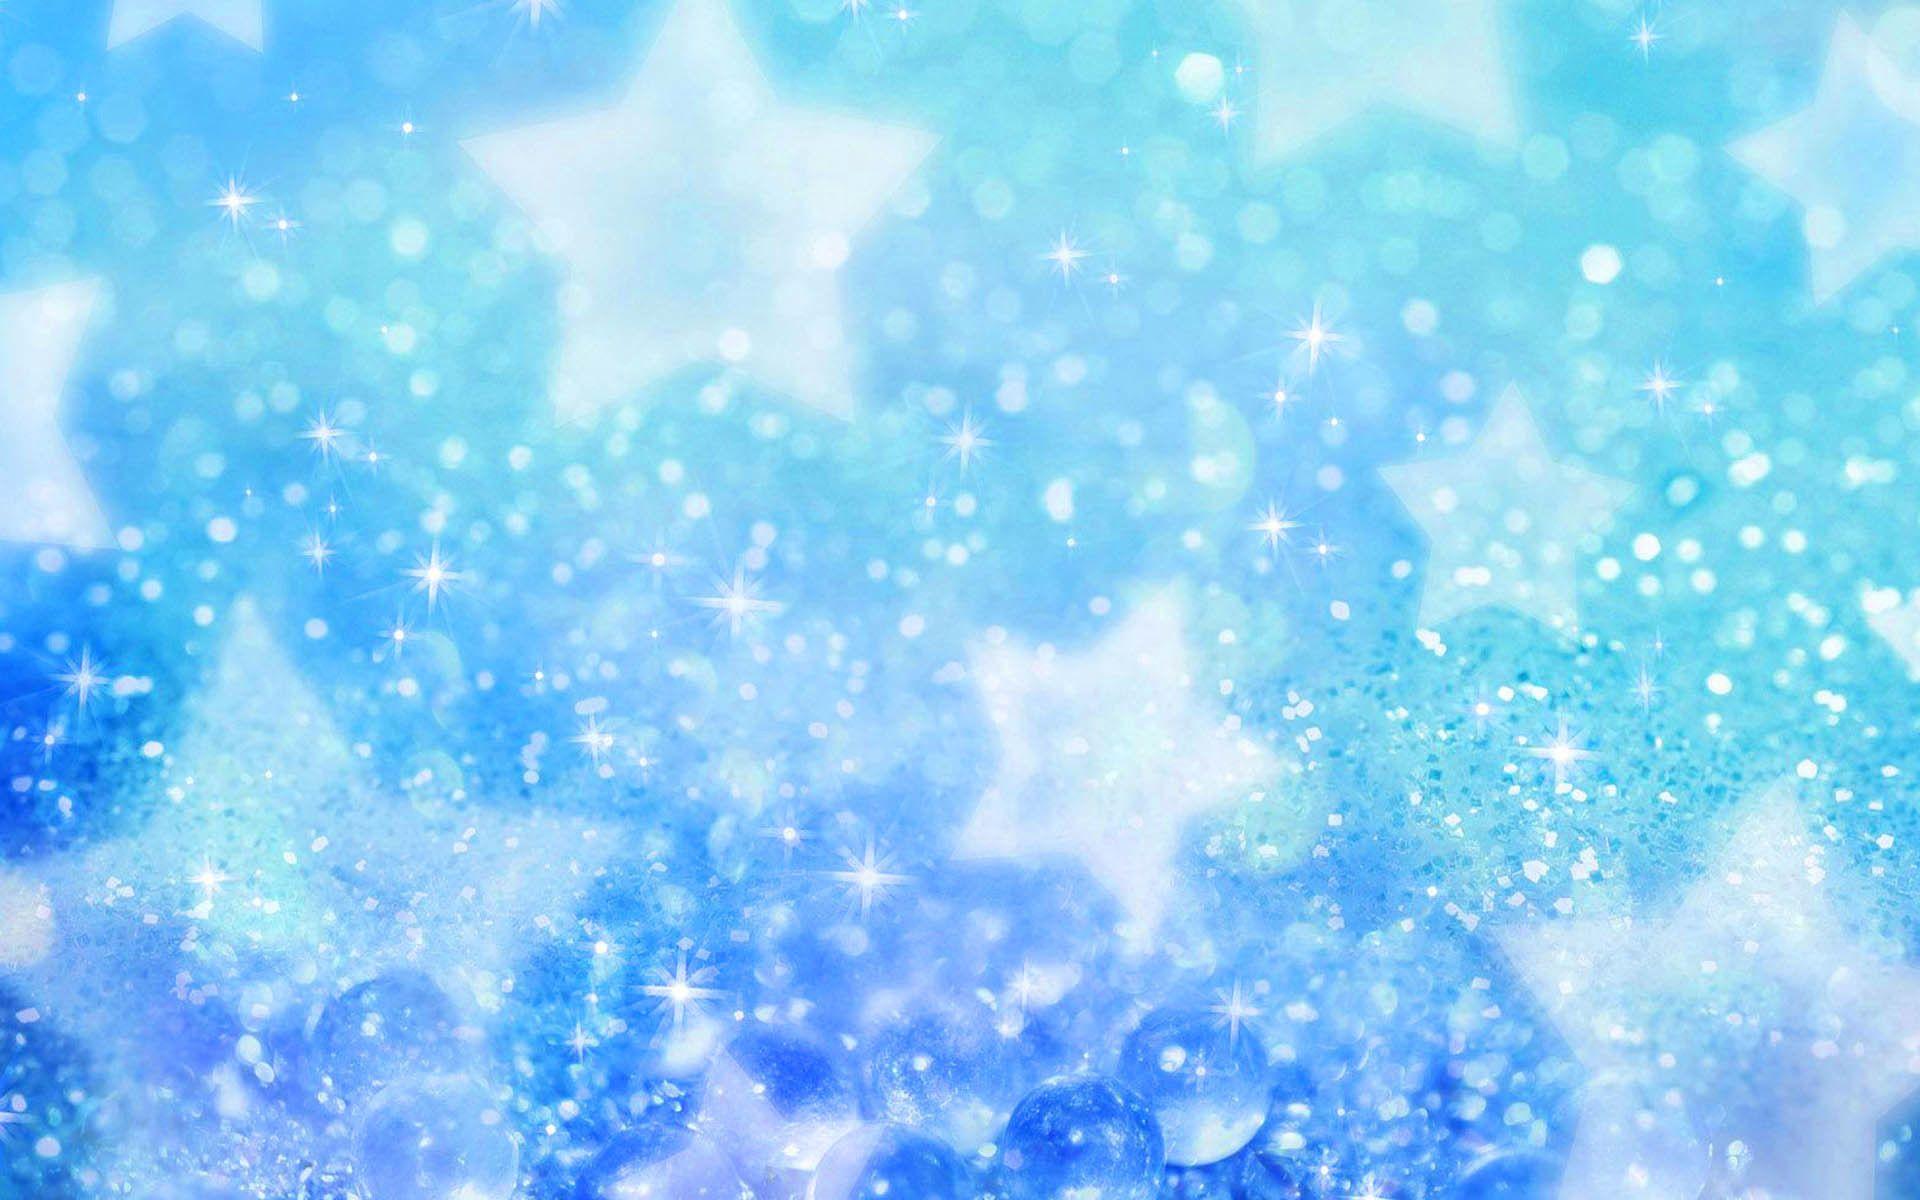 Sparkle Clipart Transparent Background  Anime Sparkles Transparent  Background PNG Image  Transparent PNG Free Download on SeekPNG